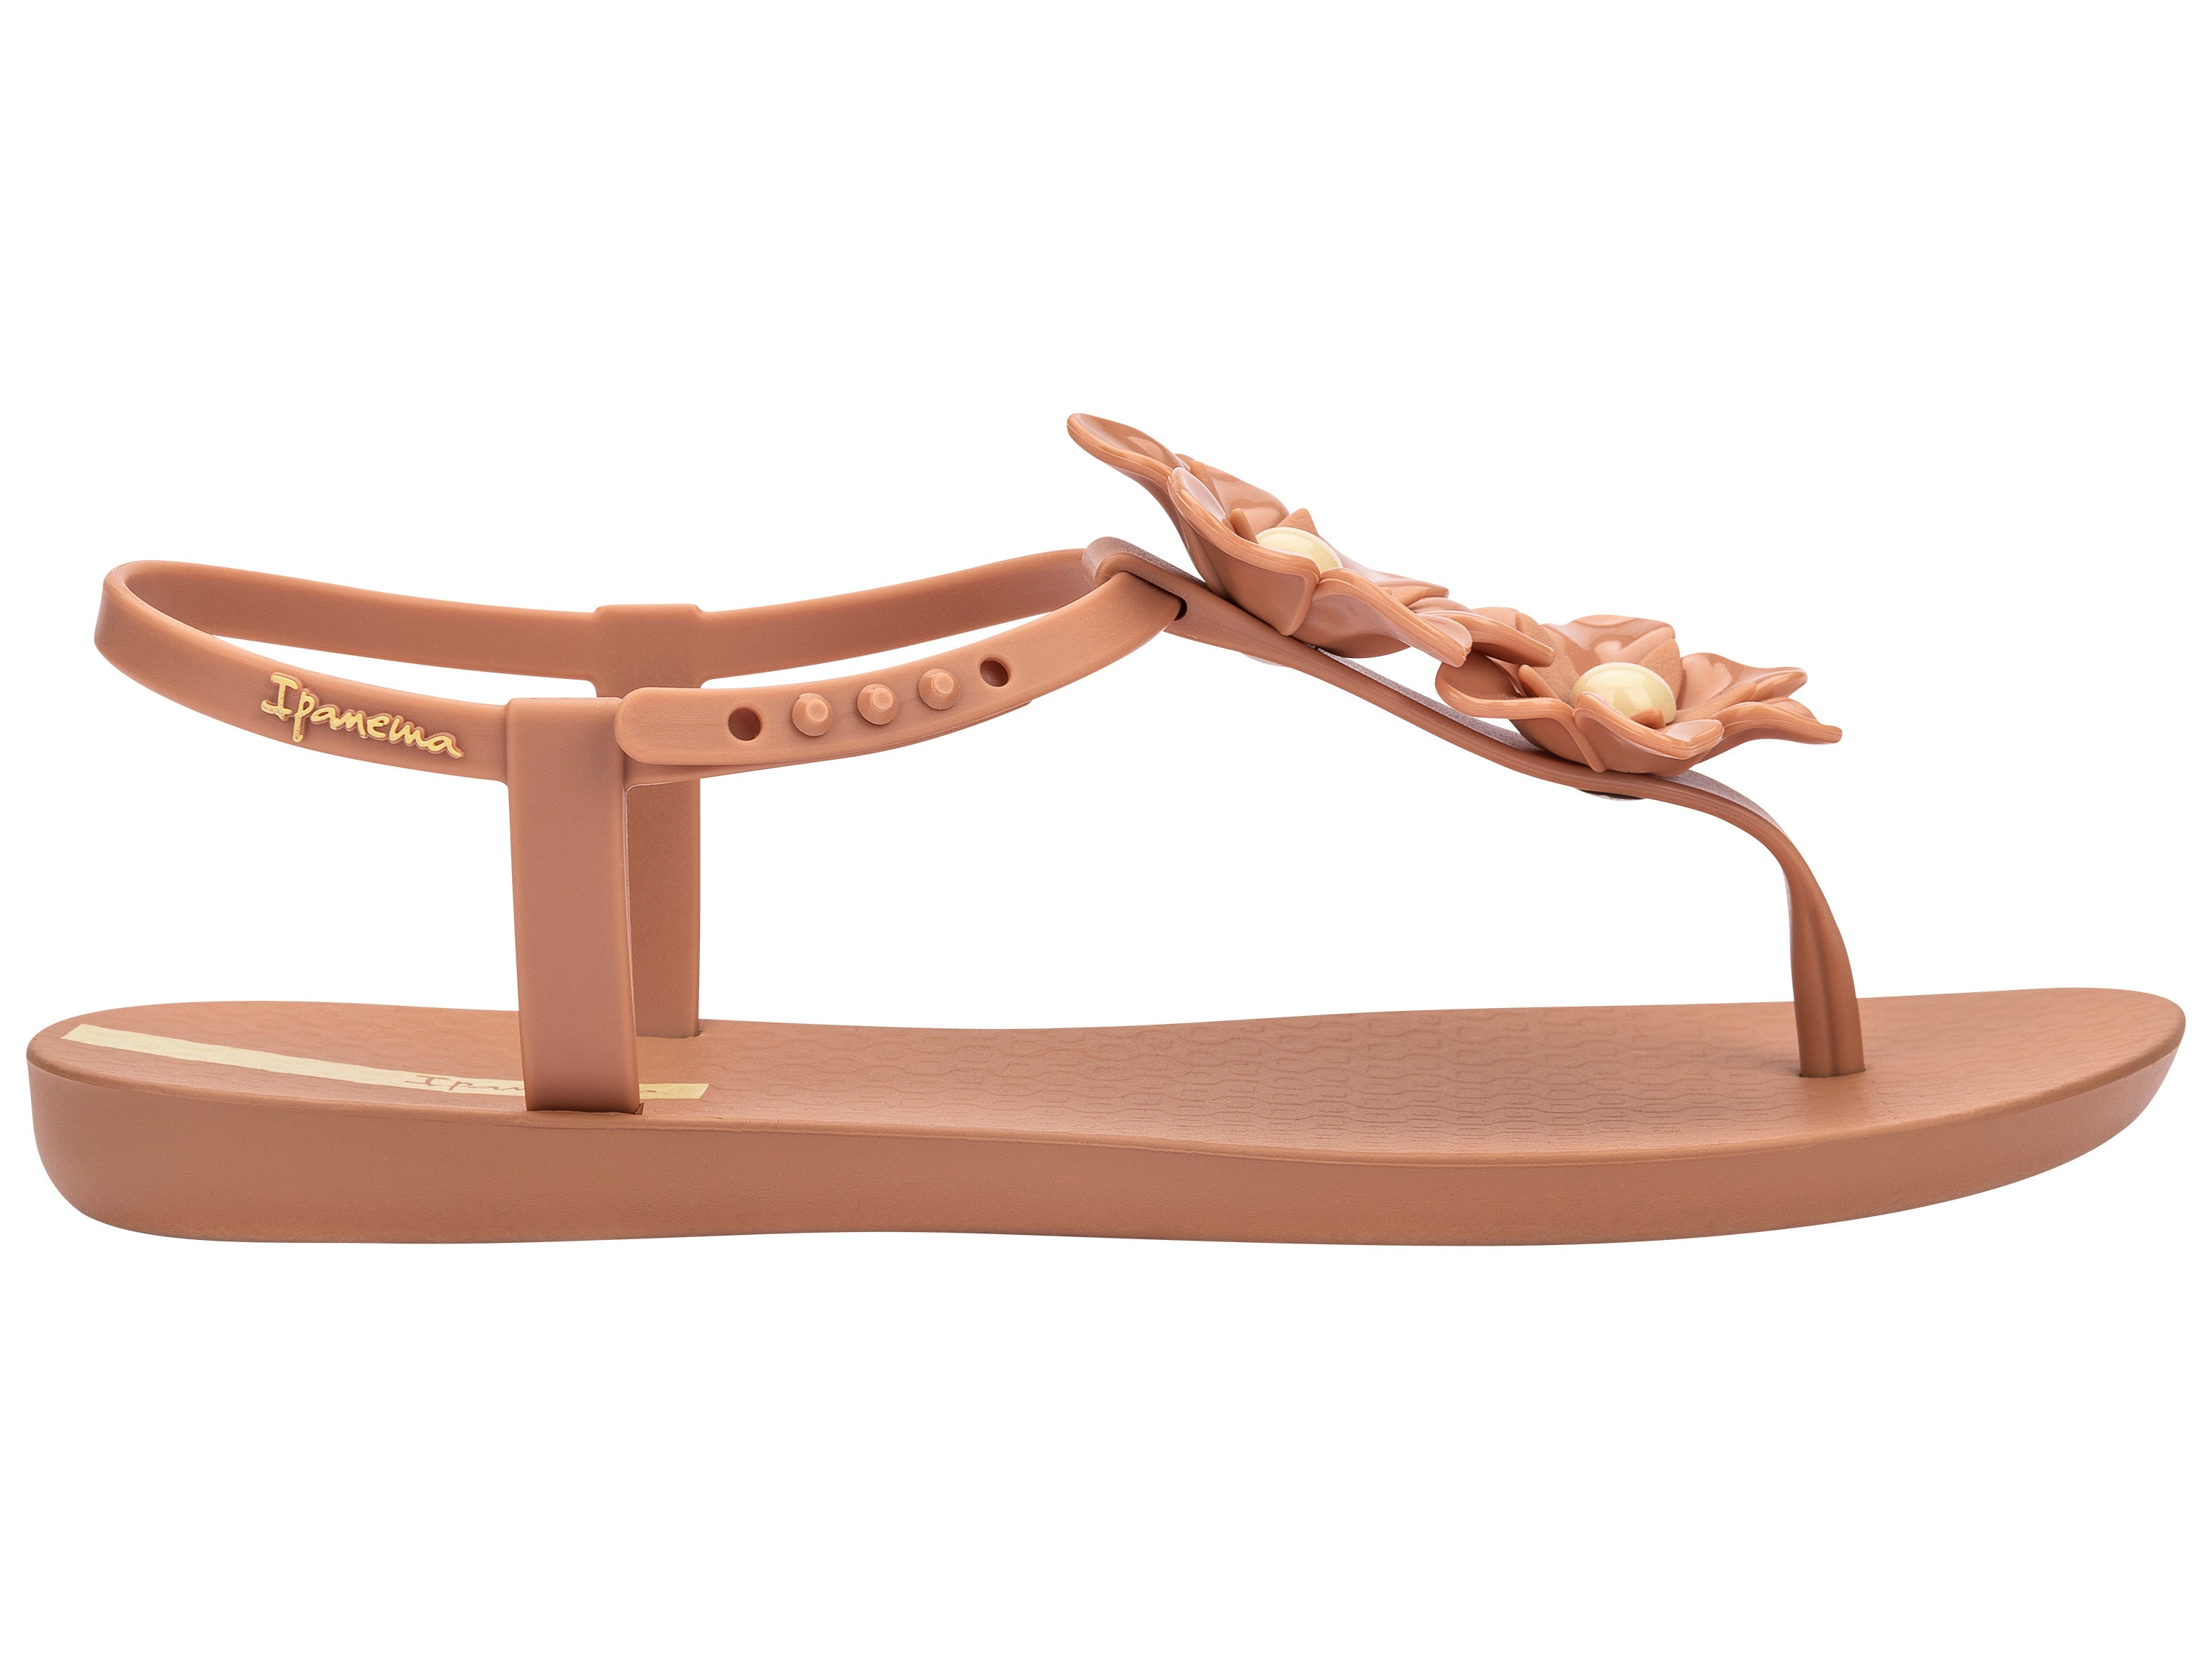 Outer side view of a brown Ipanema Duo Flowers women's t-strap sandal with two flowers.